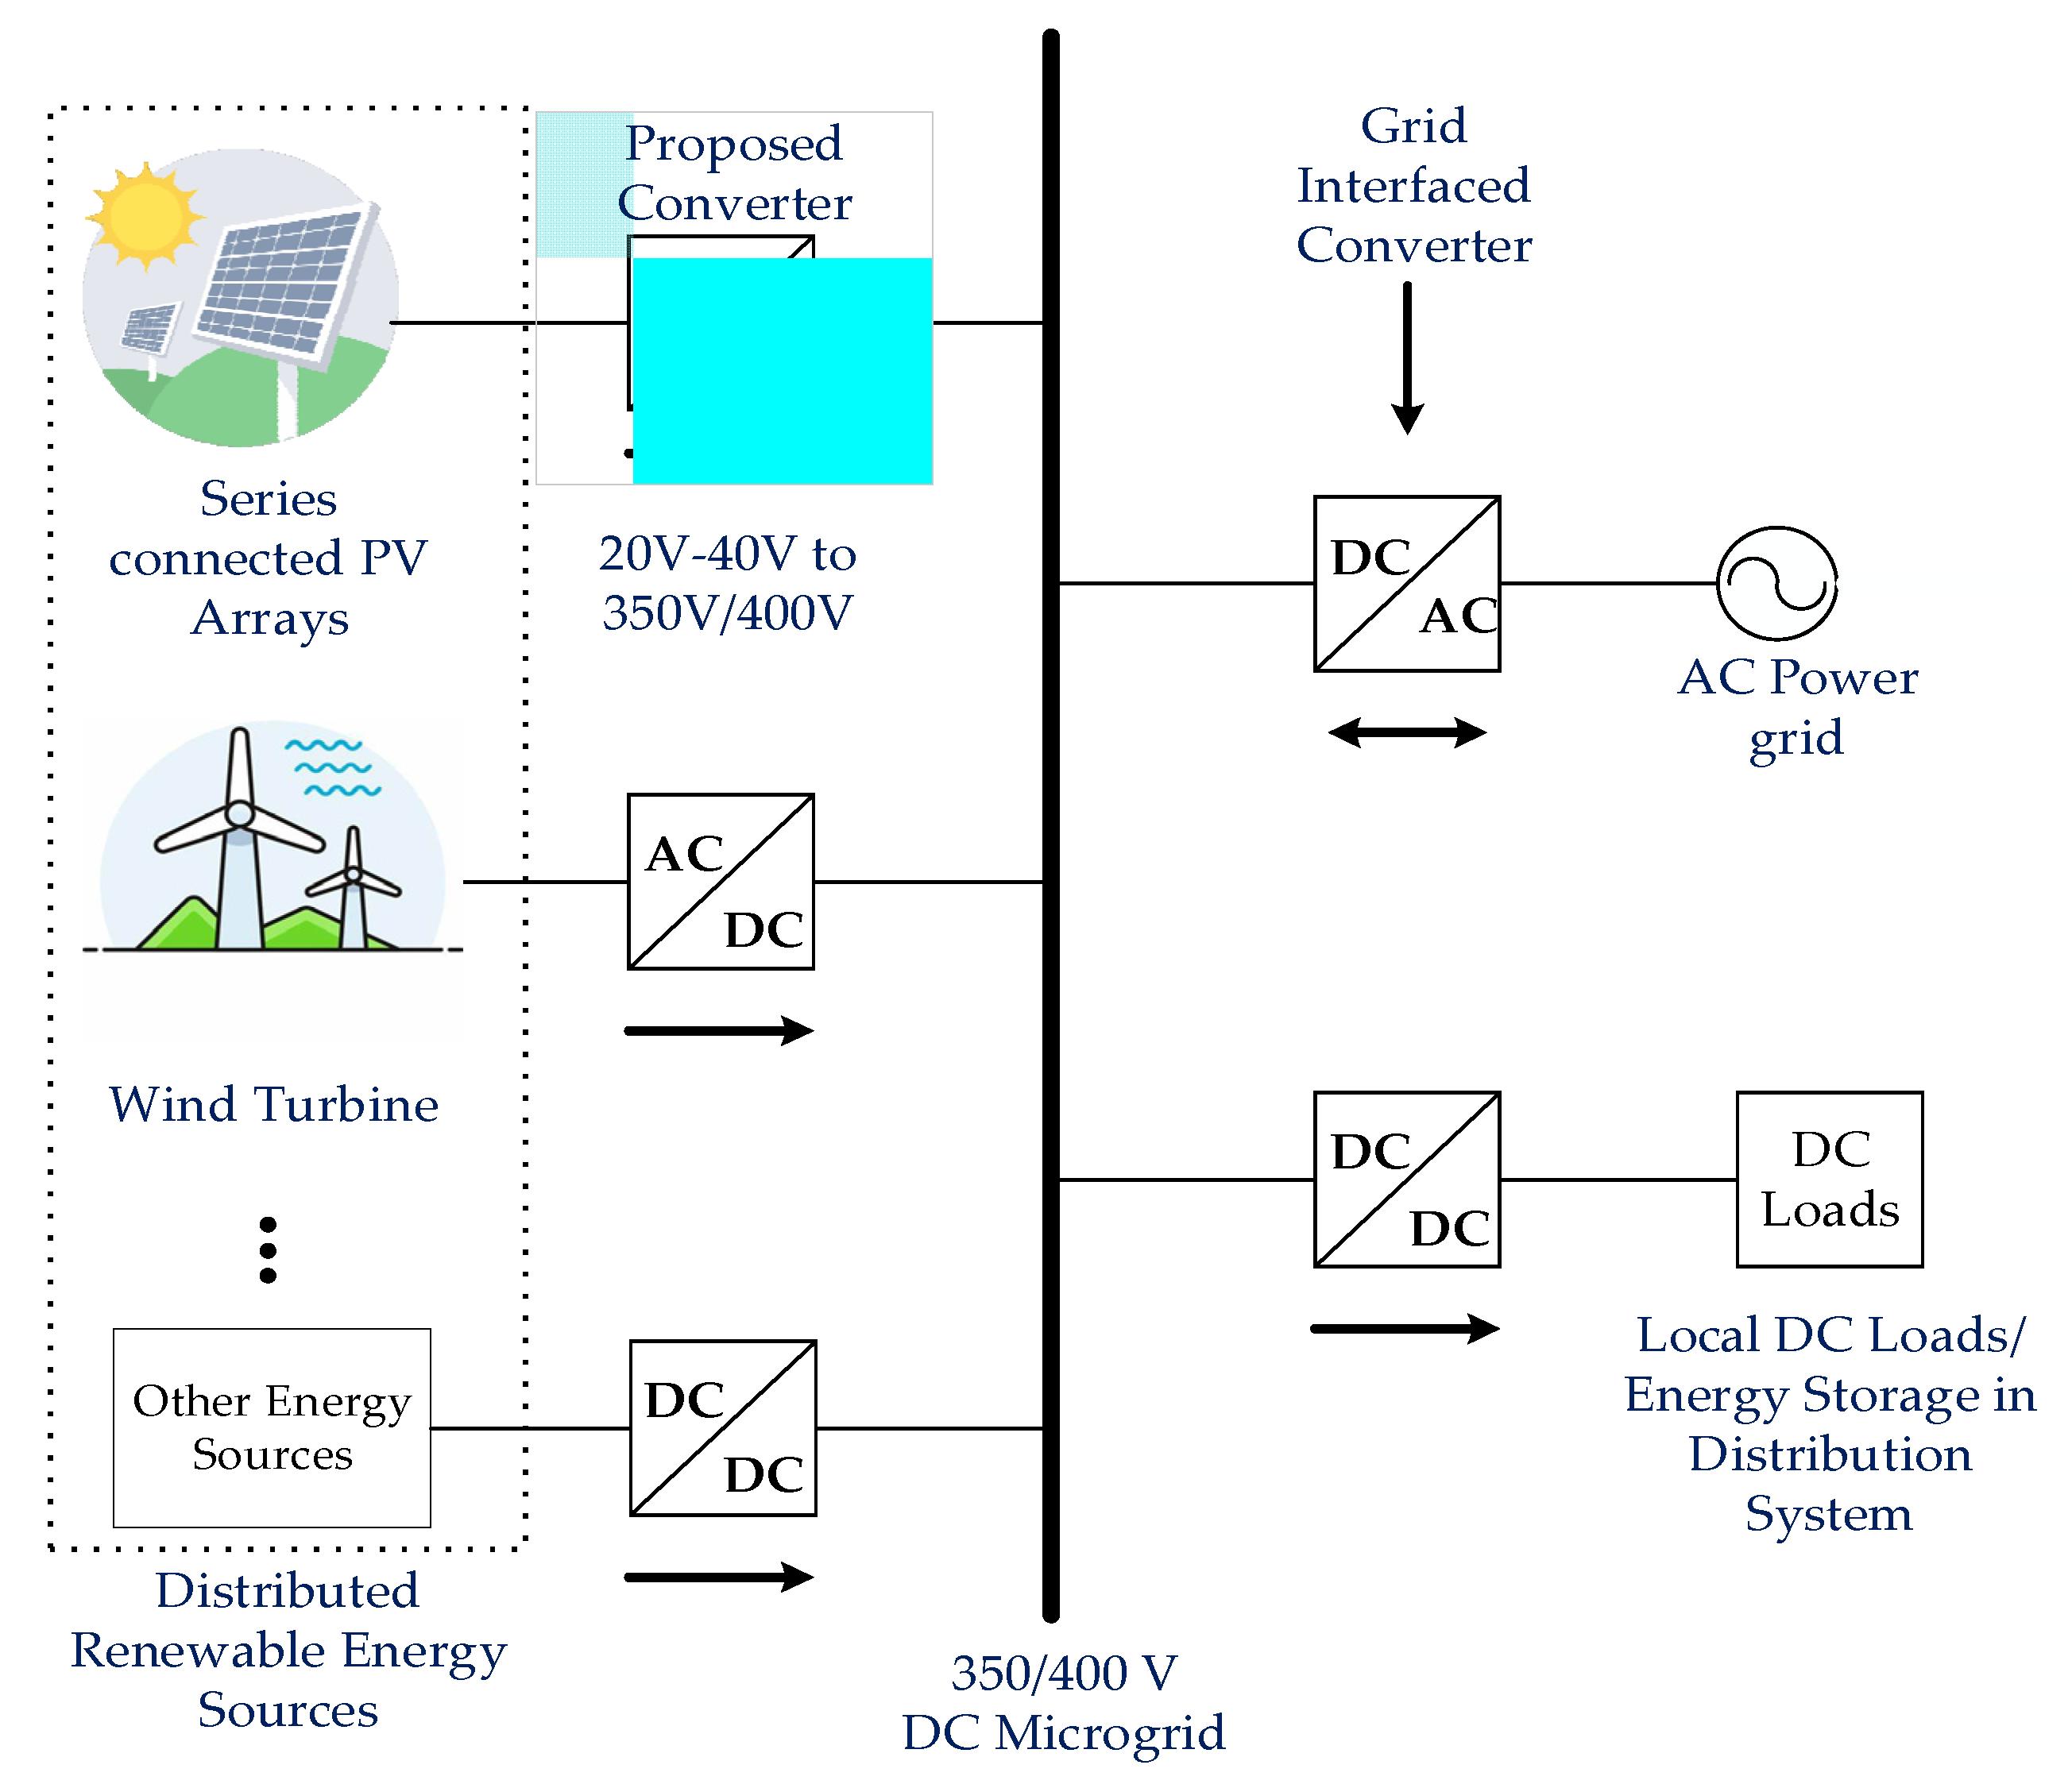 Structure of the proposed high step-up DC-DC converter for PV systems.